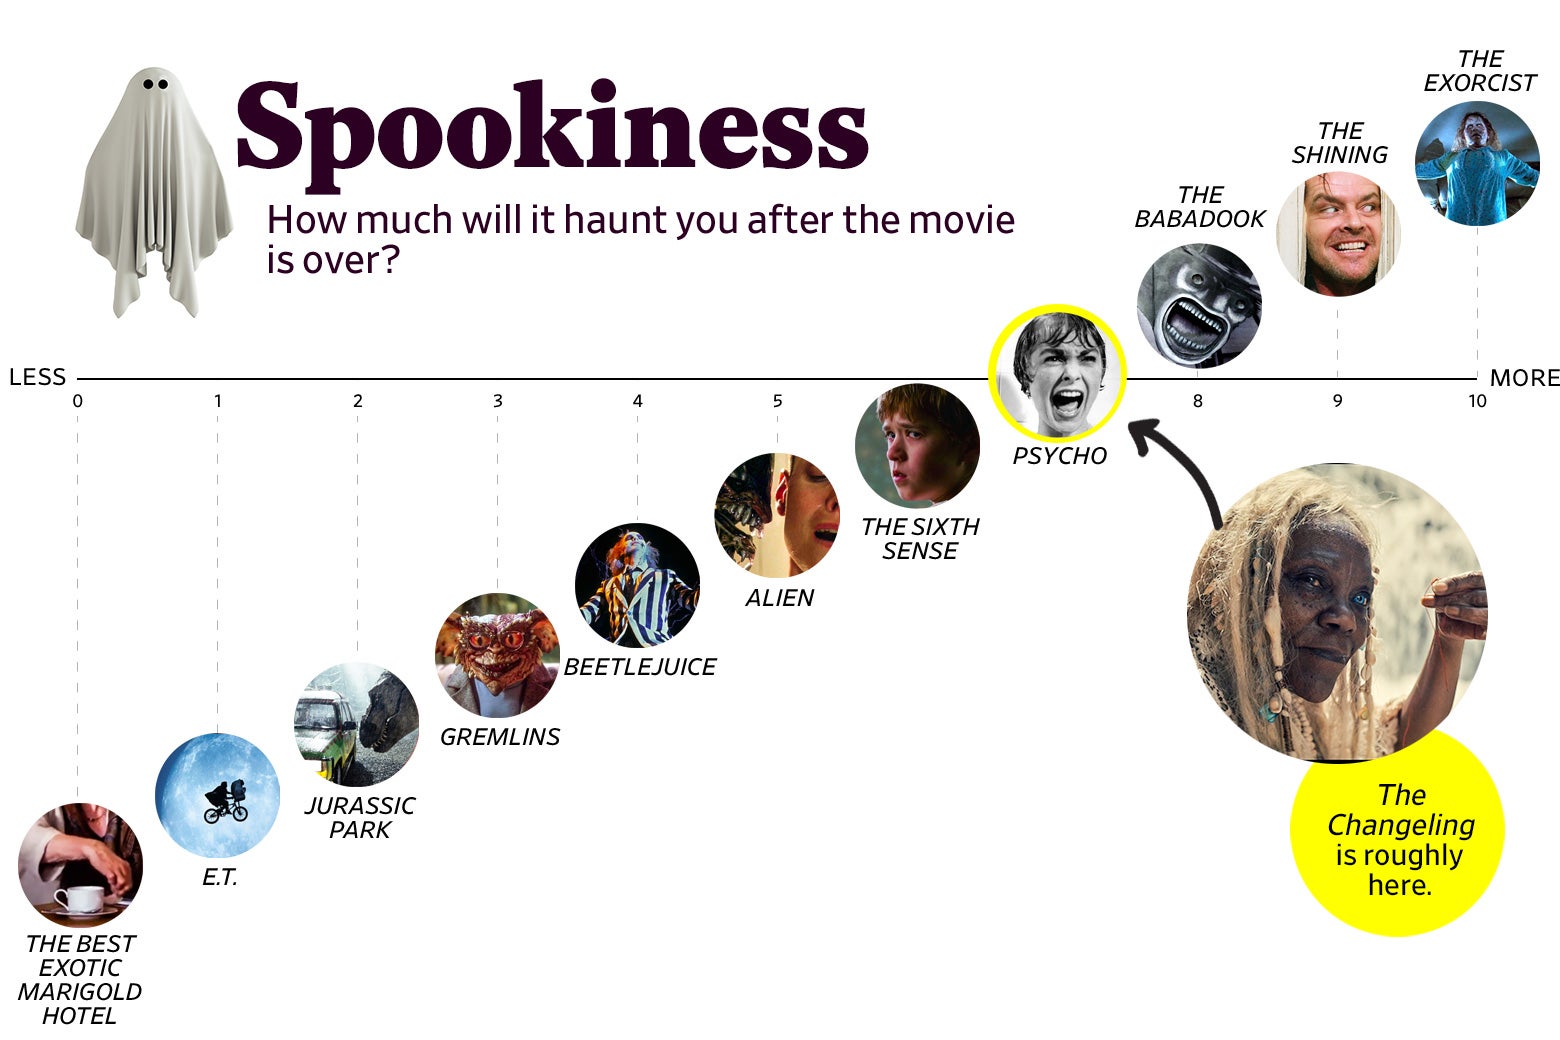 A chart titled “Spookiness: How much will it haunt you after the movie is over?” shows that The Changeling ranks a 7 in spookiness, roughly the same as Psycho. The scale ranges from The Best Exotic Marigold Hotel (0) to The Exorcist (10).